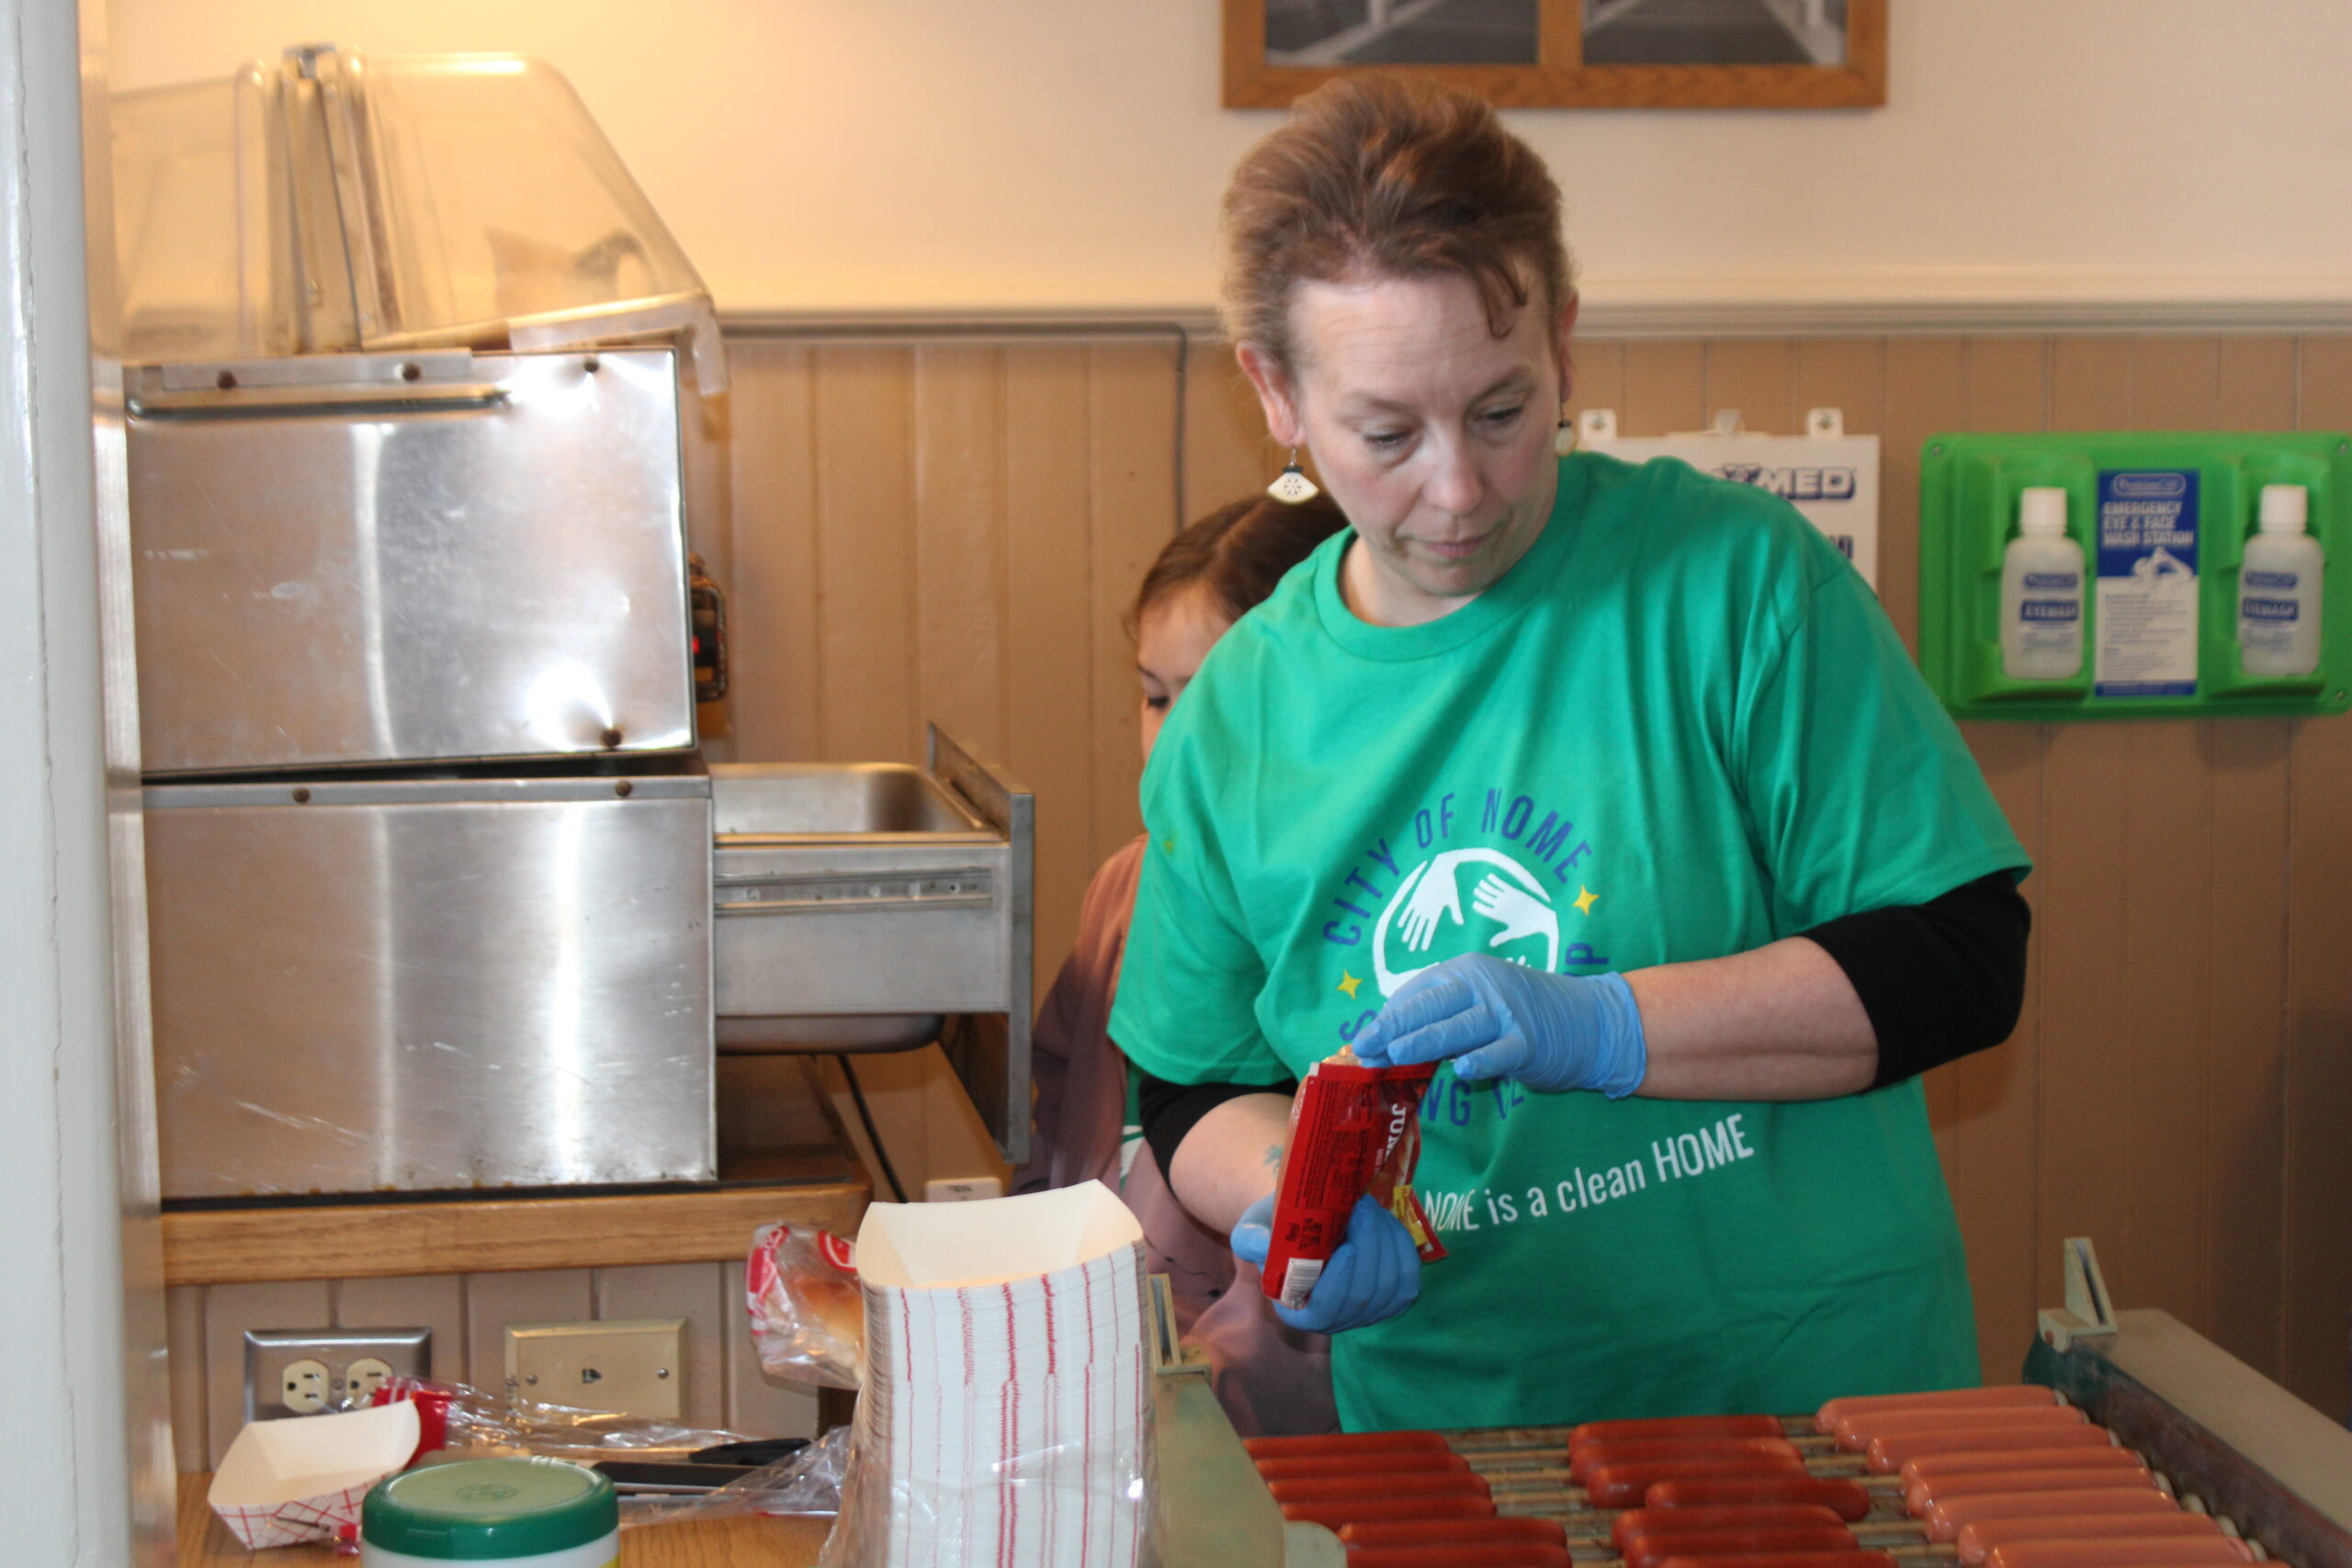 Volunteer Jennifer Reader helps cook hot dogs provided by AC and Hanson's. Sarah Swartz photo.